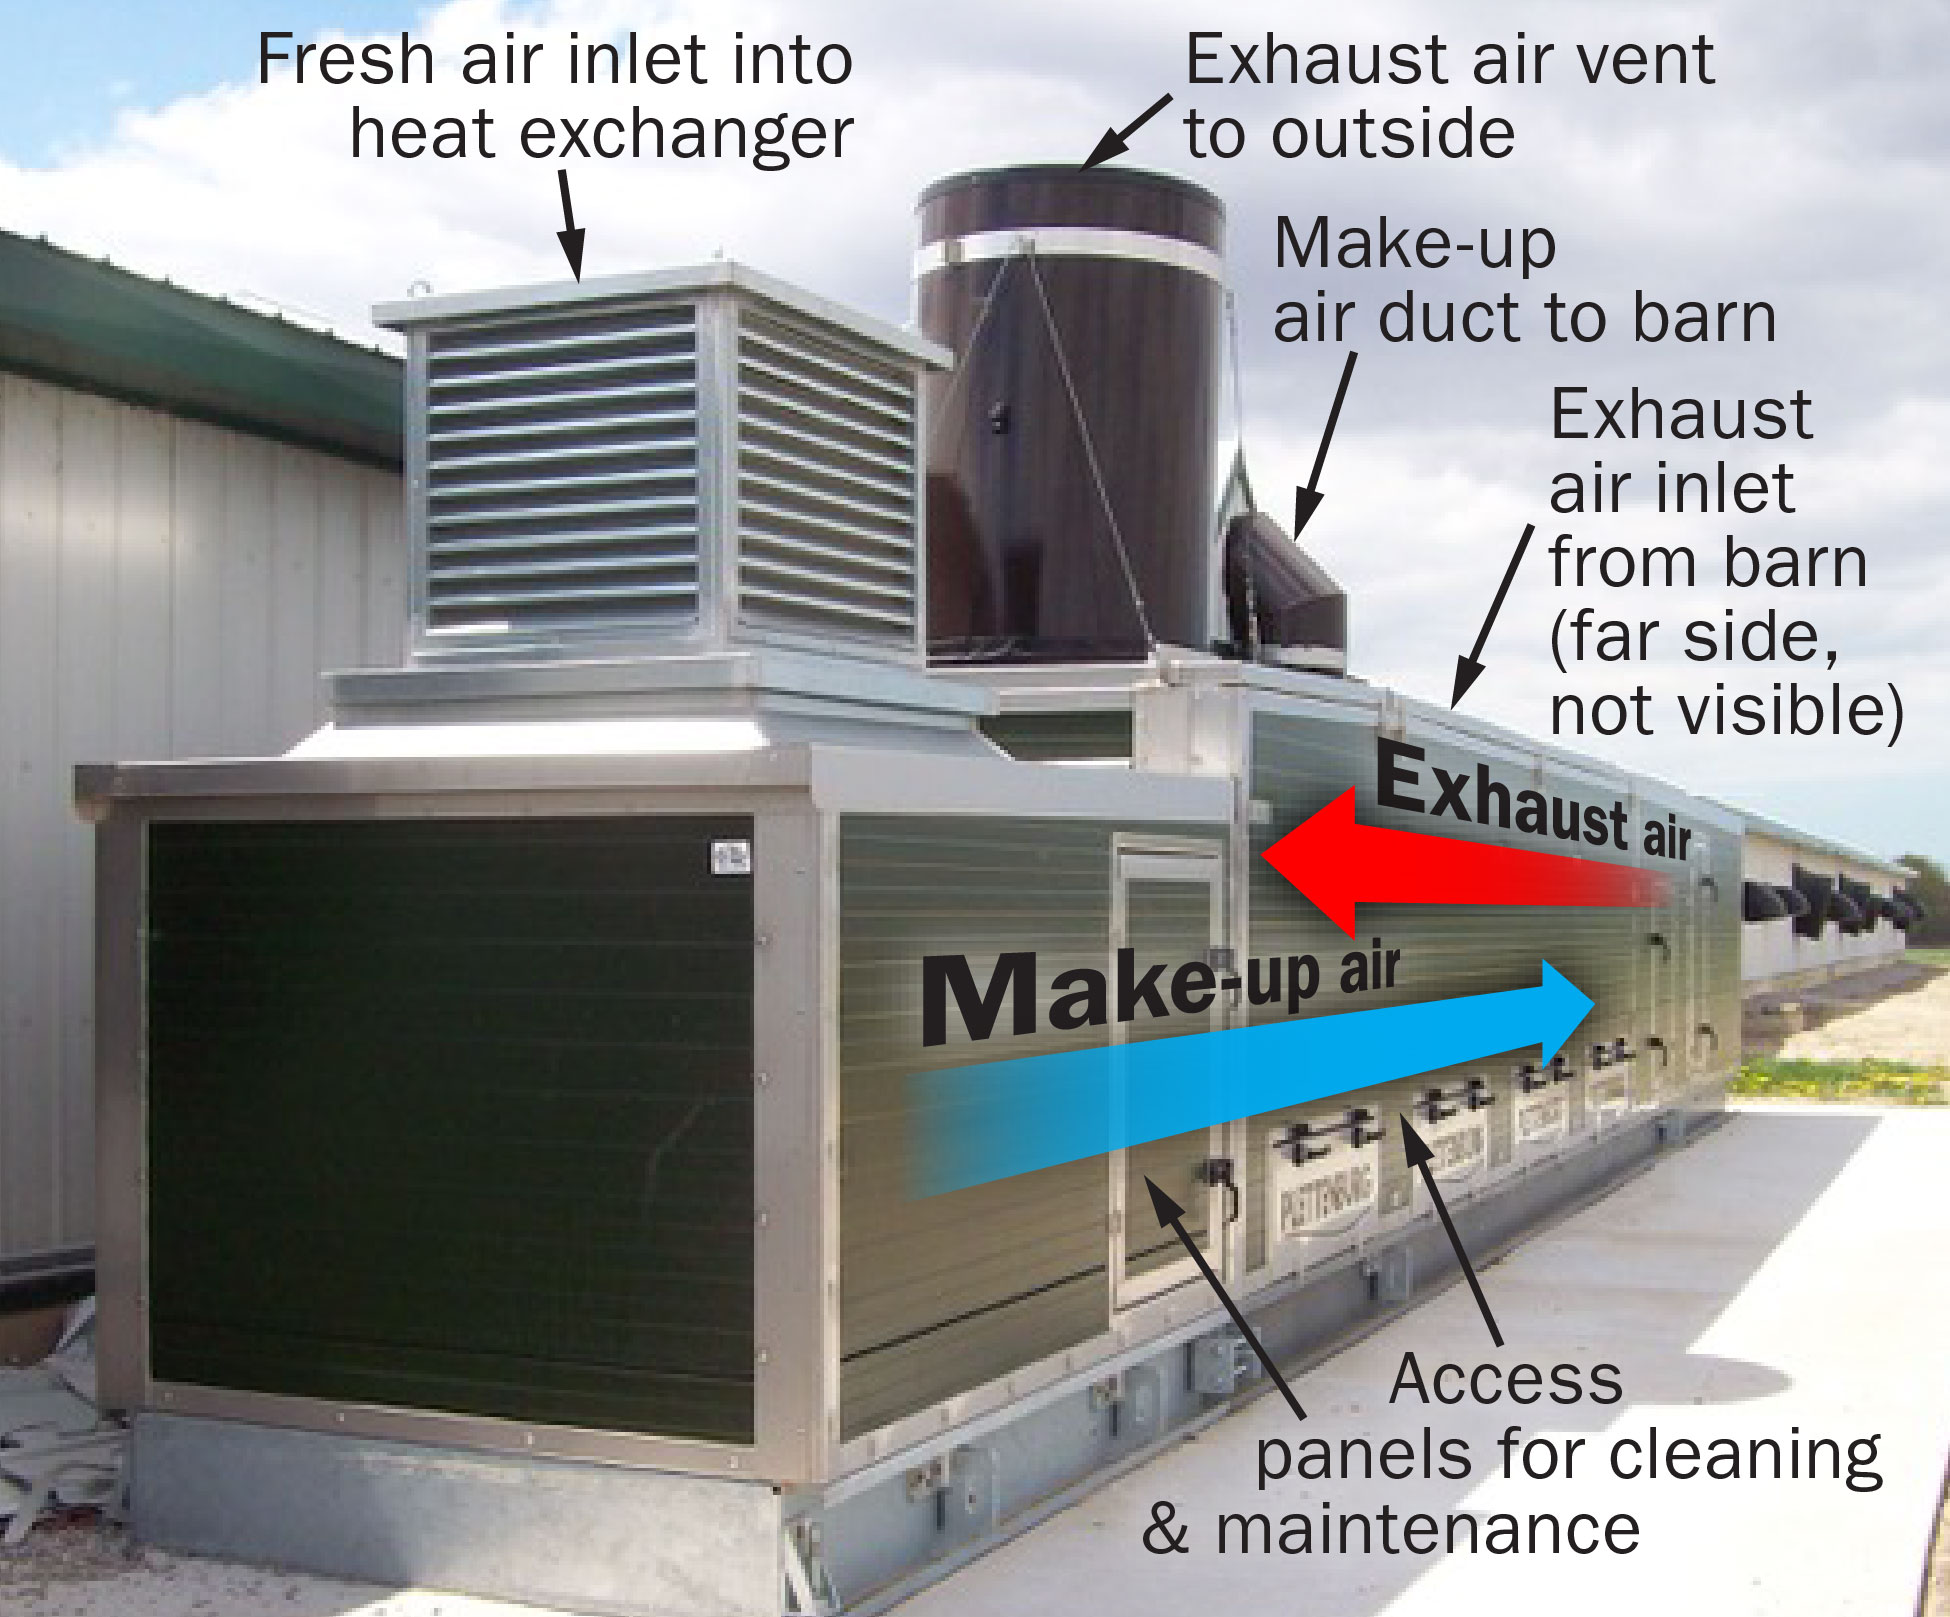 This heat exchanger is designed to handle 100% of the ventilation in winter months. The core is located inside the large cabinet. Exhaust air and make-up air travel in opposite directions through the core, and heat moves between them.